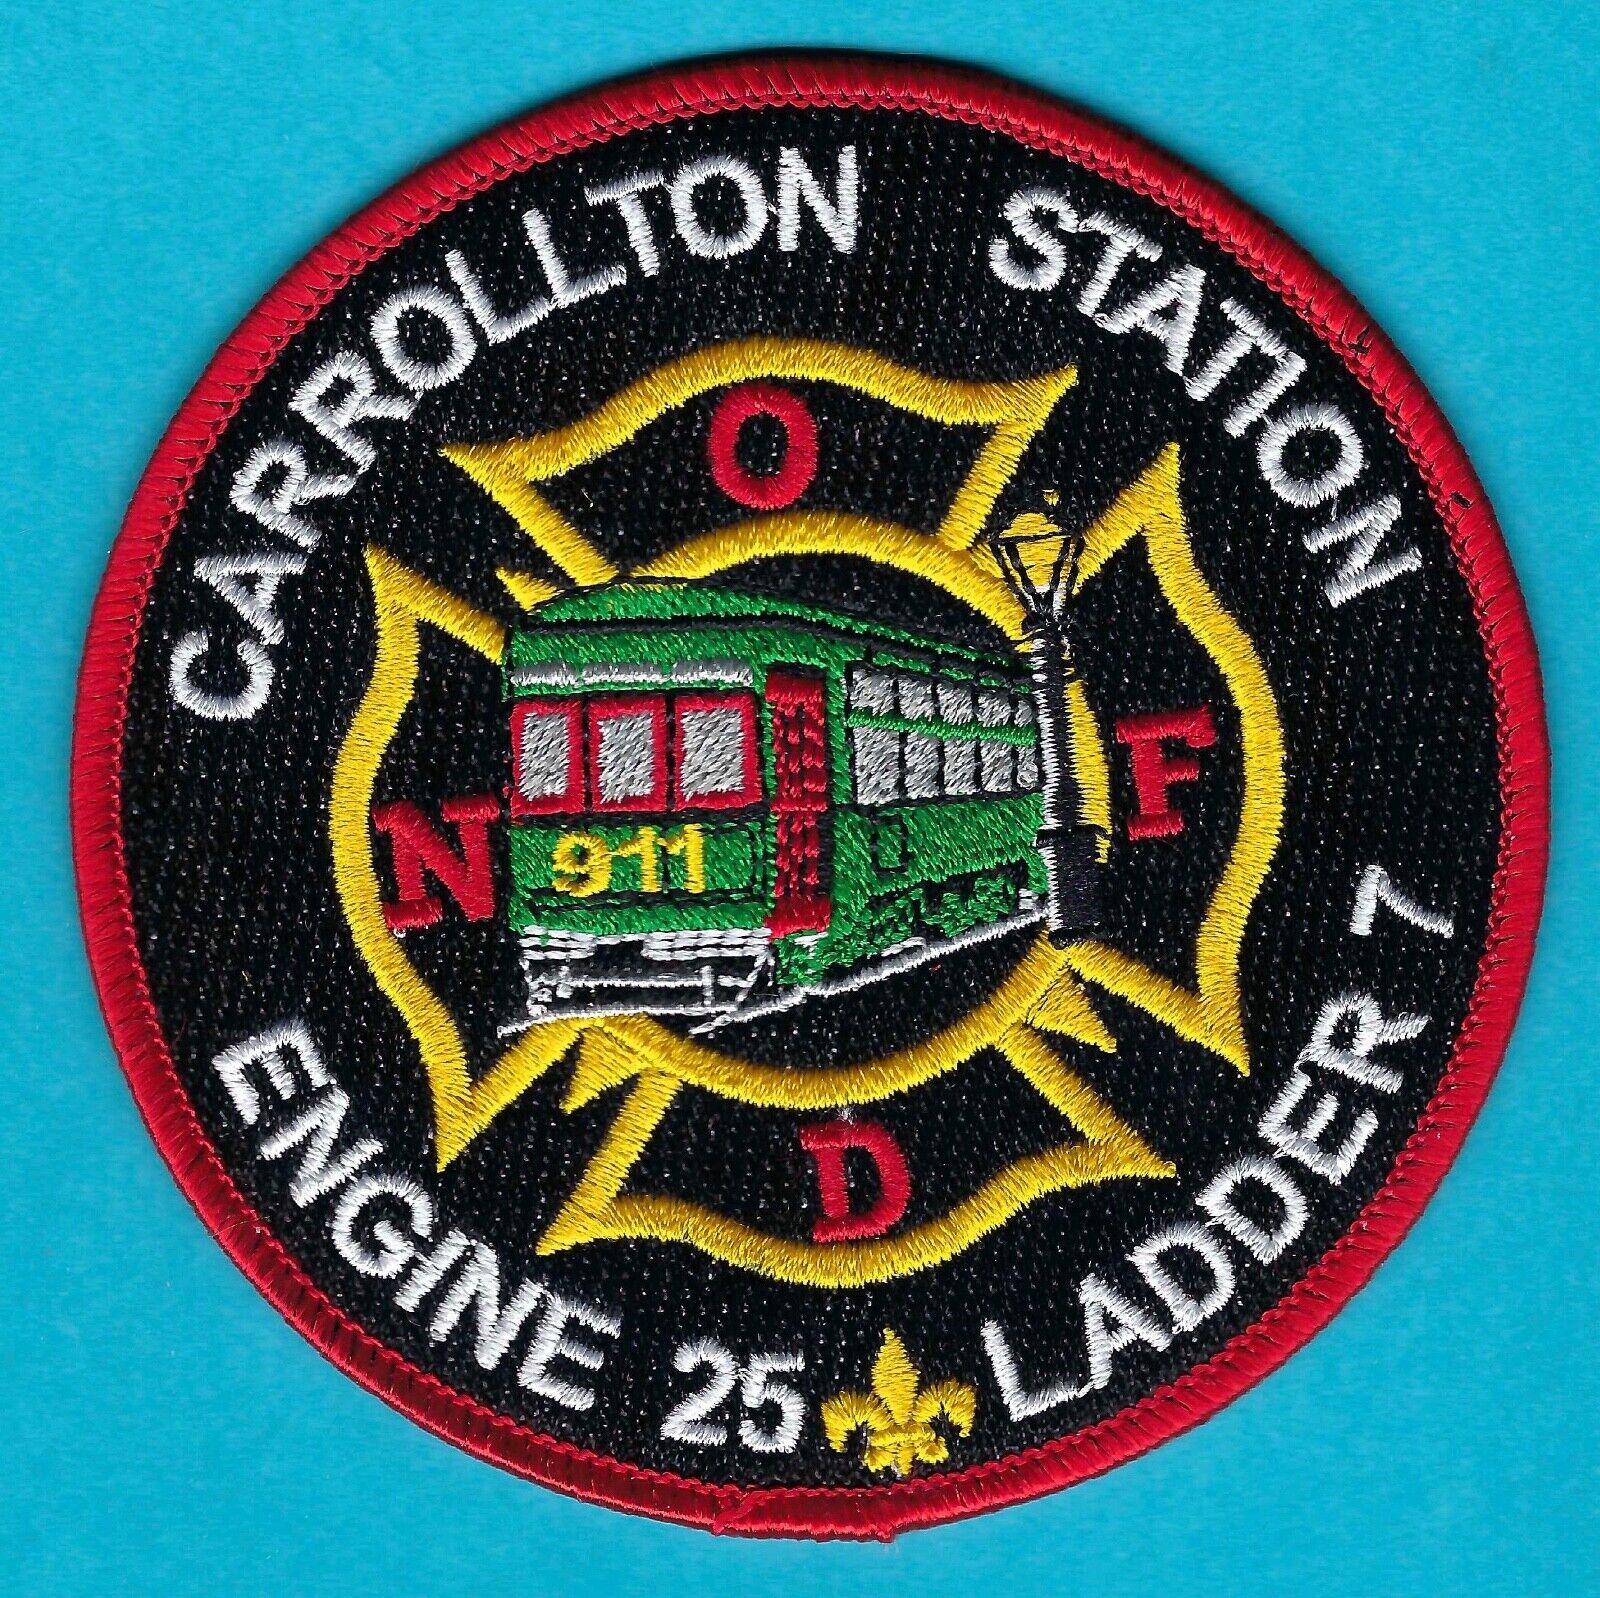 NEW ORLEANS LOUISIANA ENGINE 25 LADDER 7 FIRE COMPANY PATCH